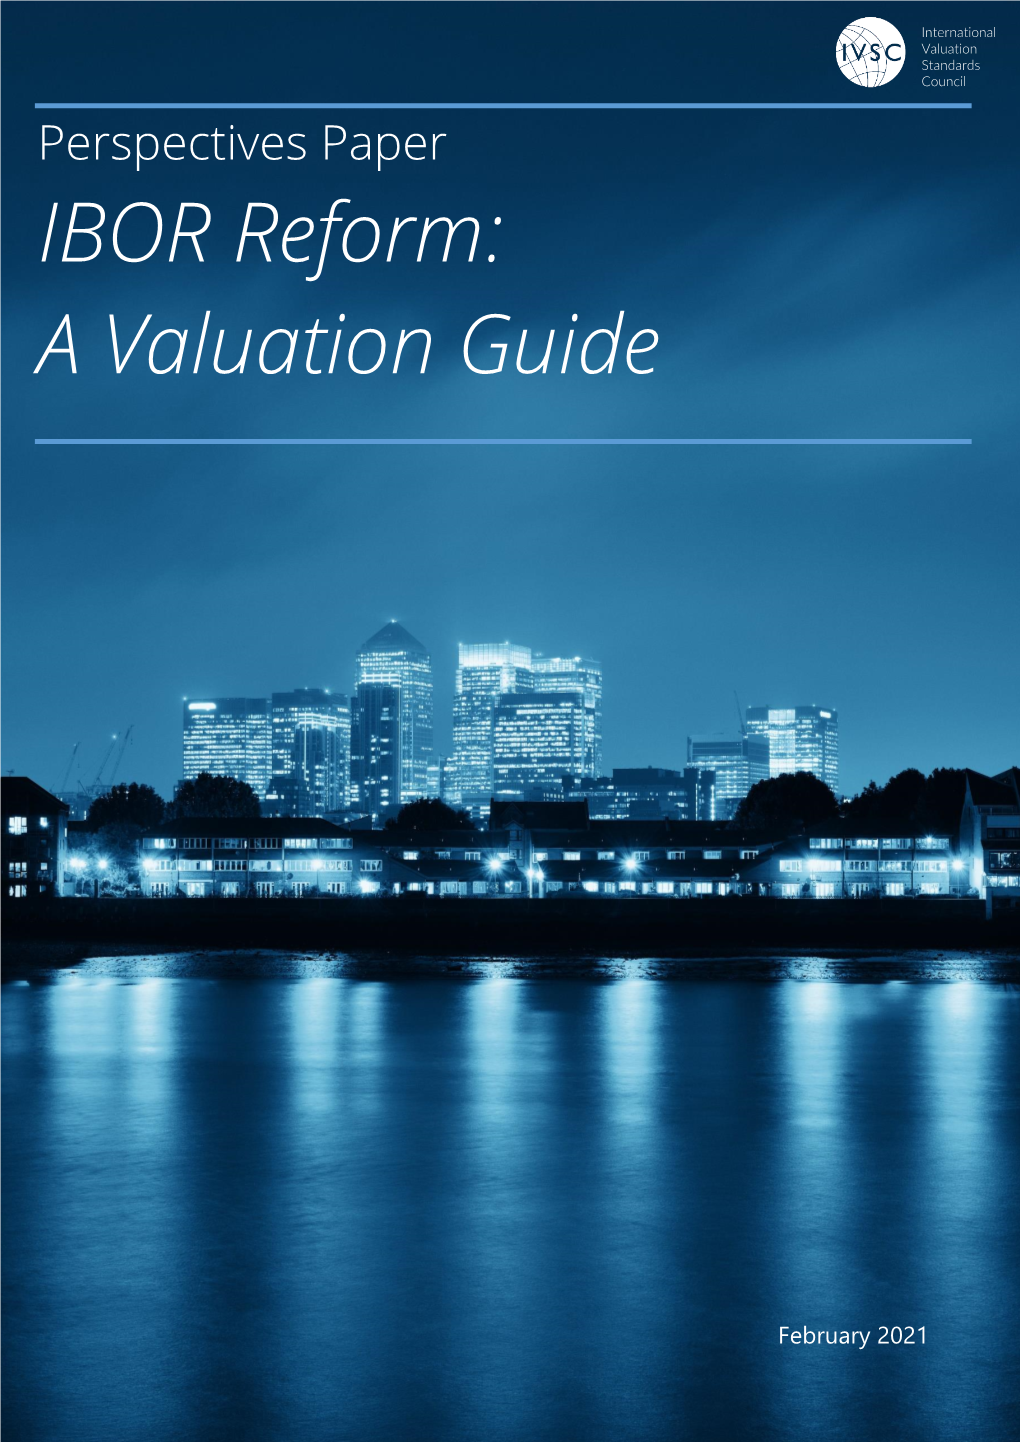 IBOR Reform: a Valuation Guide